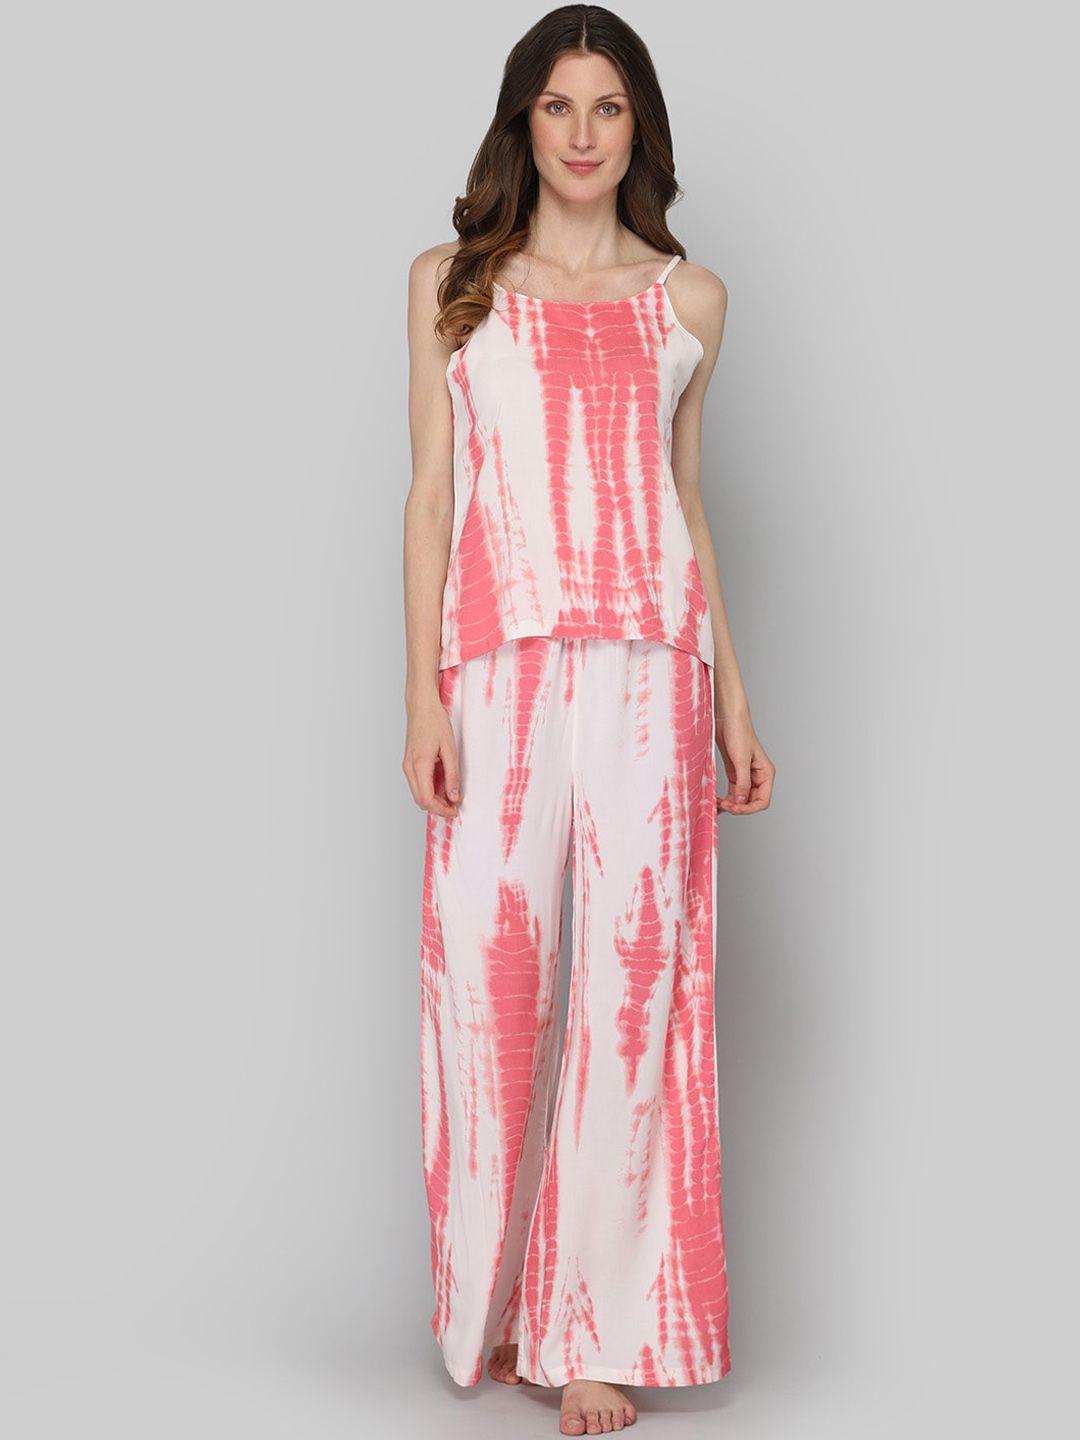 drape-in-vogue-women-off-white-&-pink-printed-night-suit